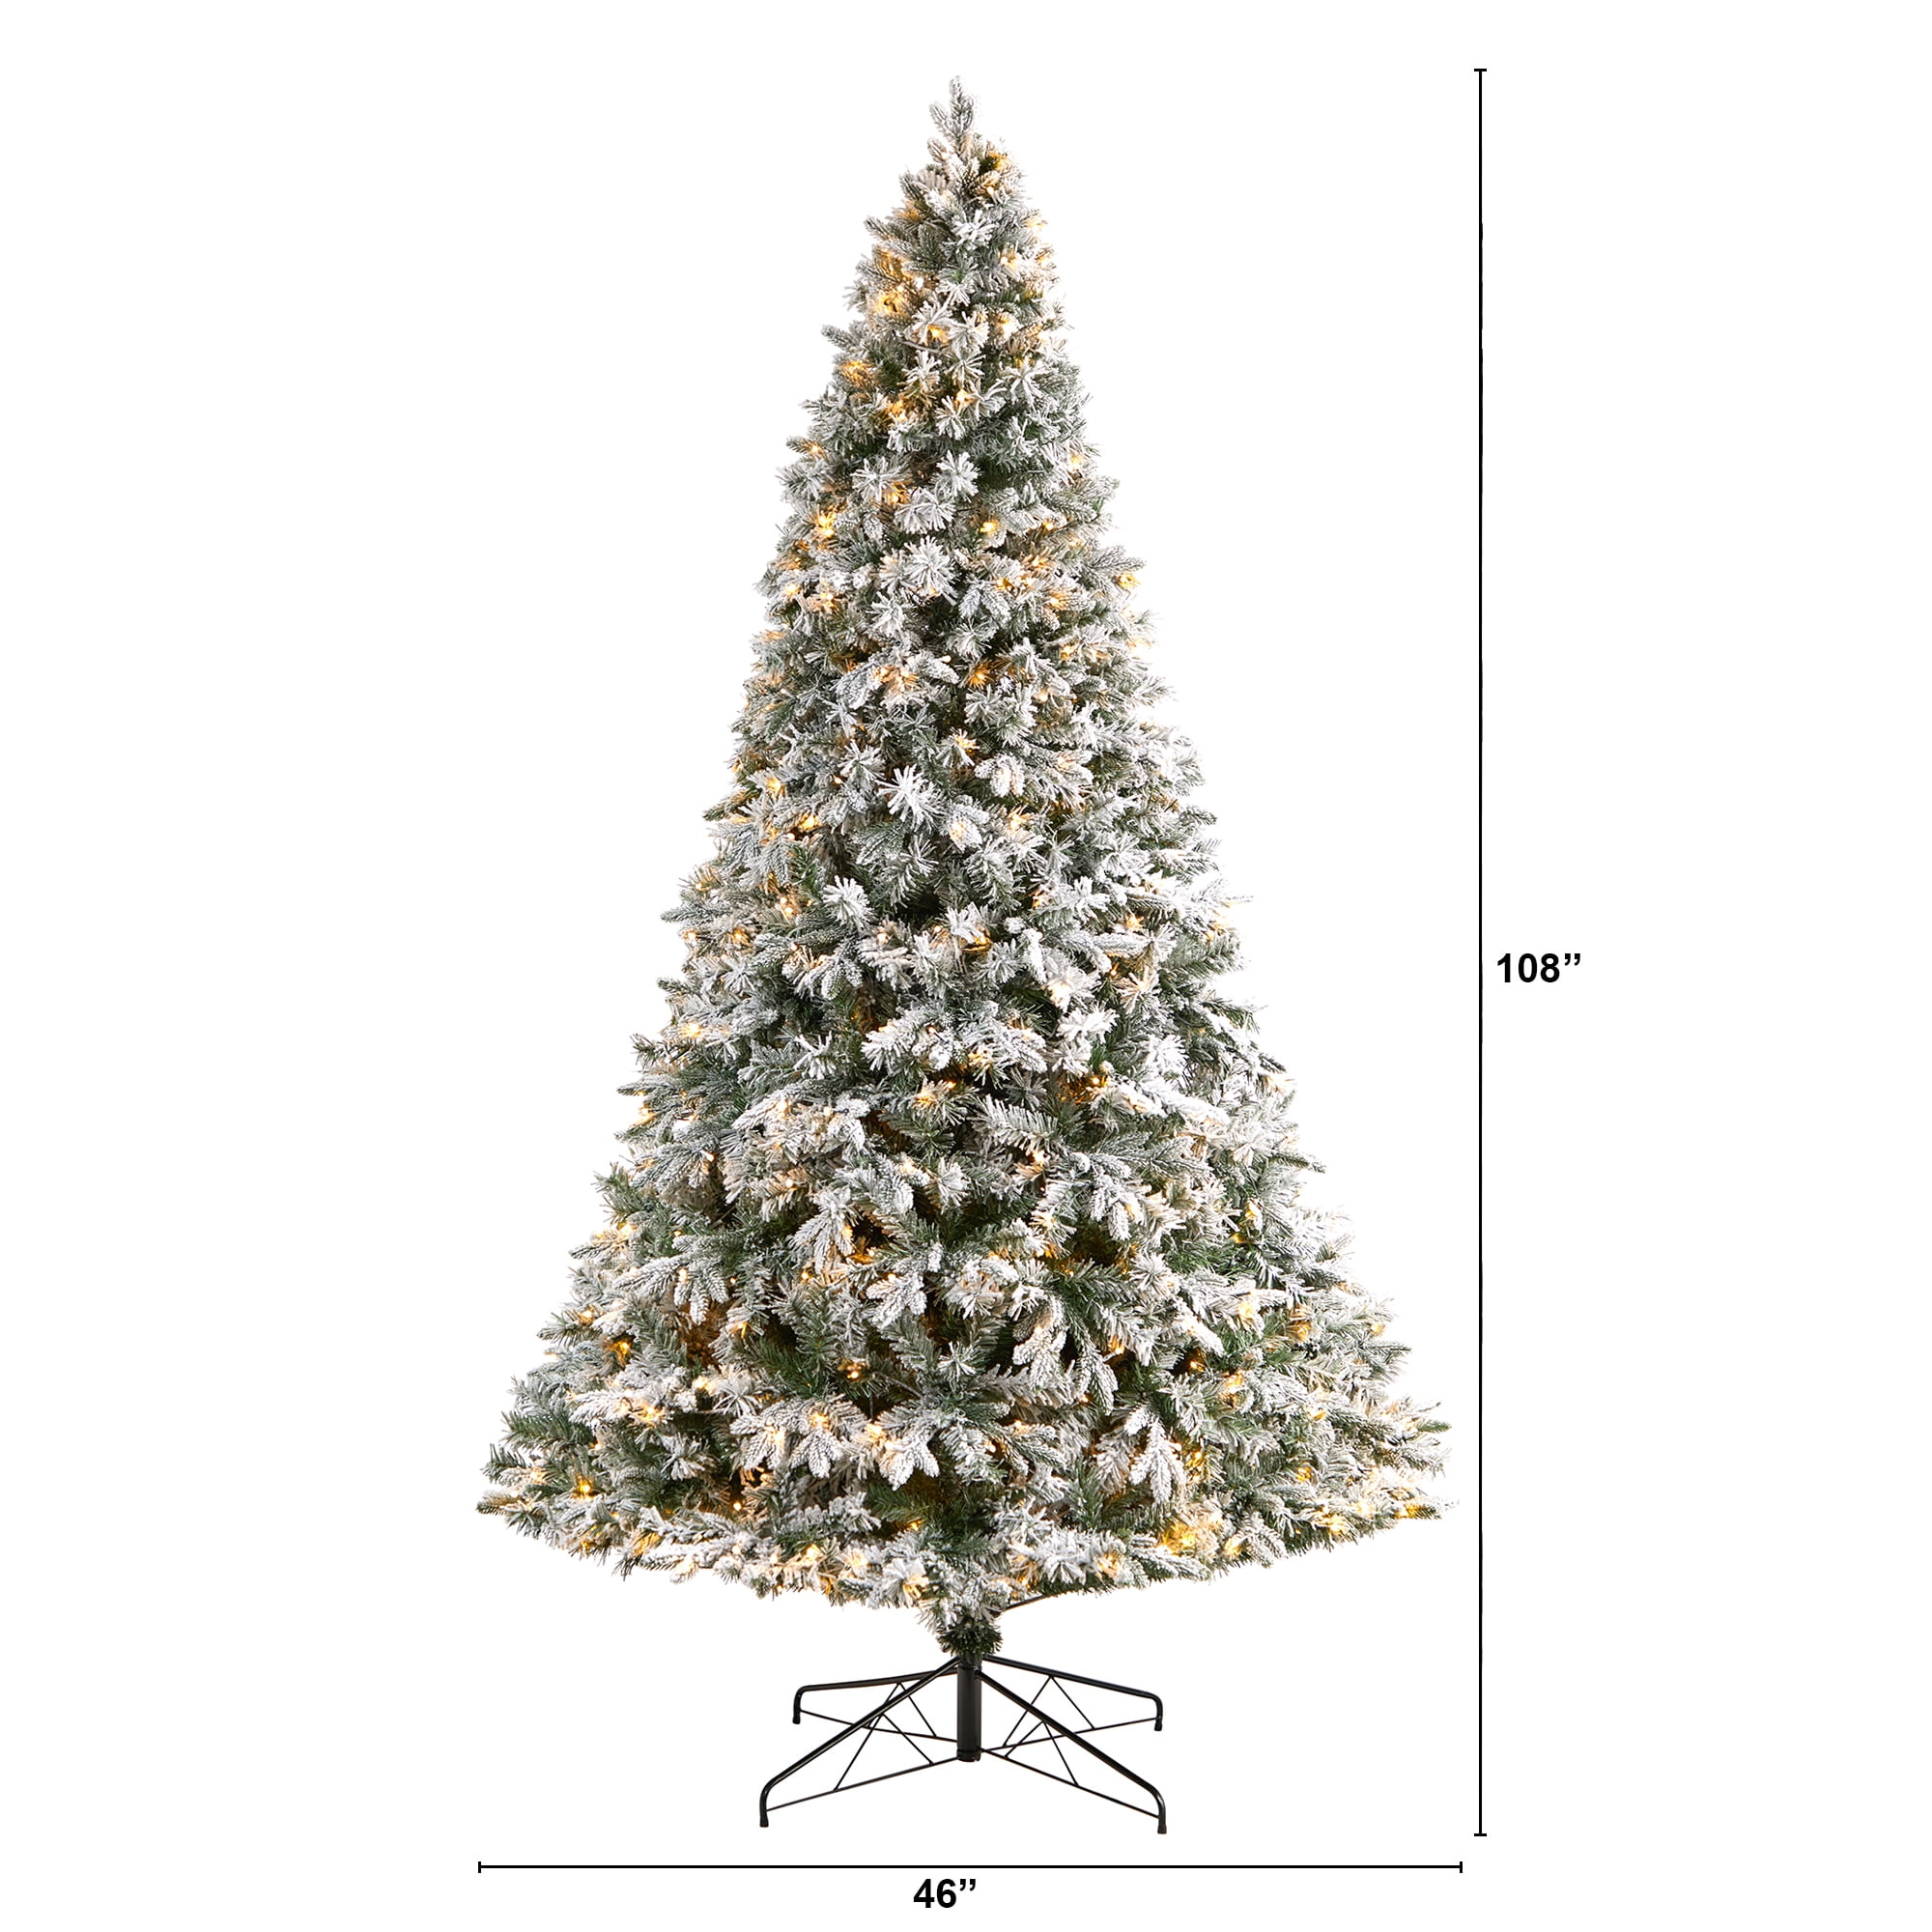 6.2ft Snow Artificial Christmas Tree With Decoration Set 